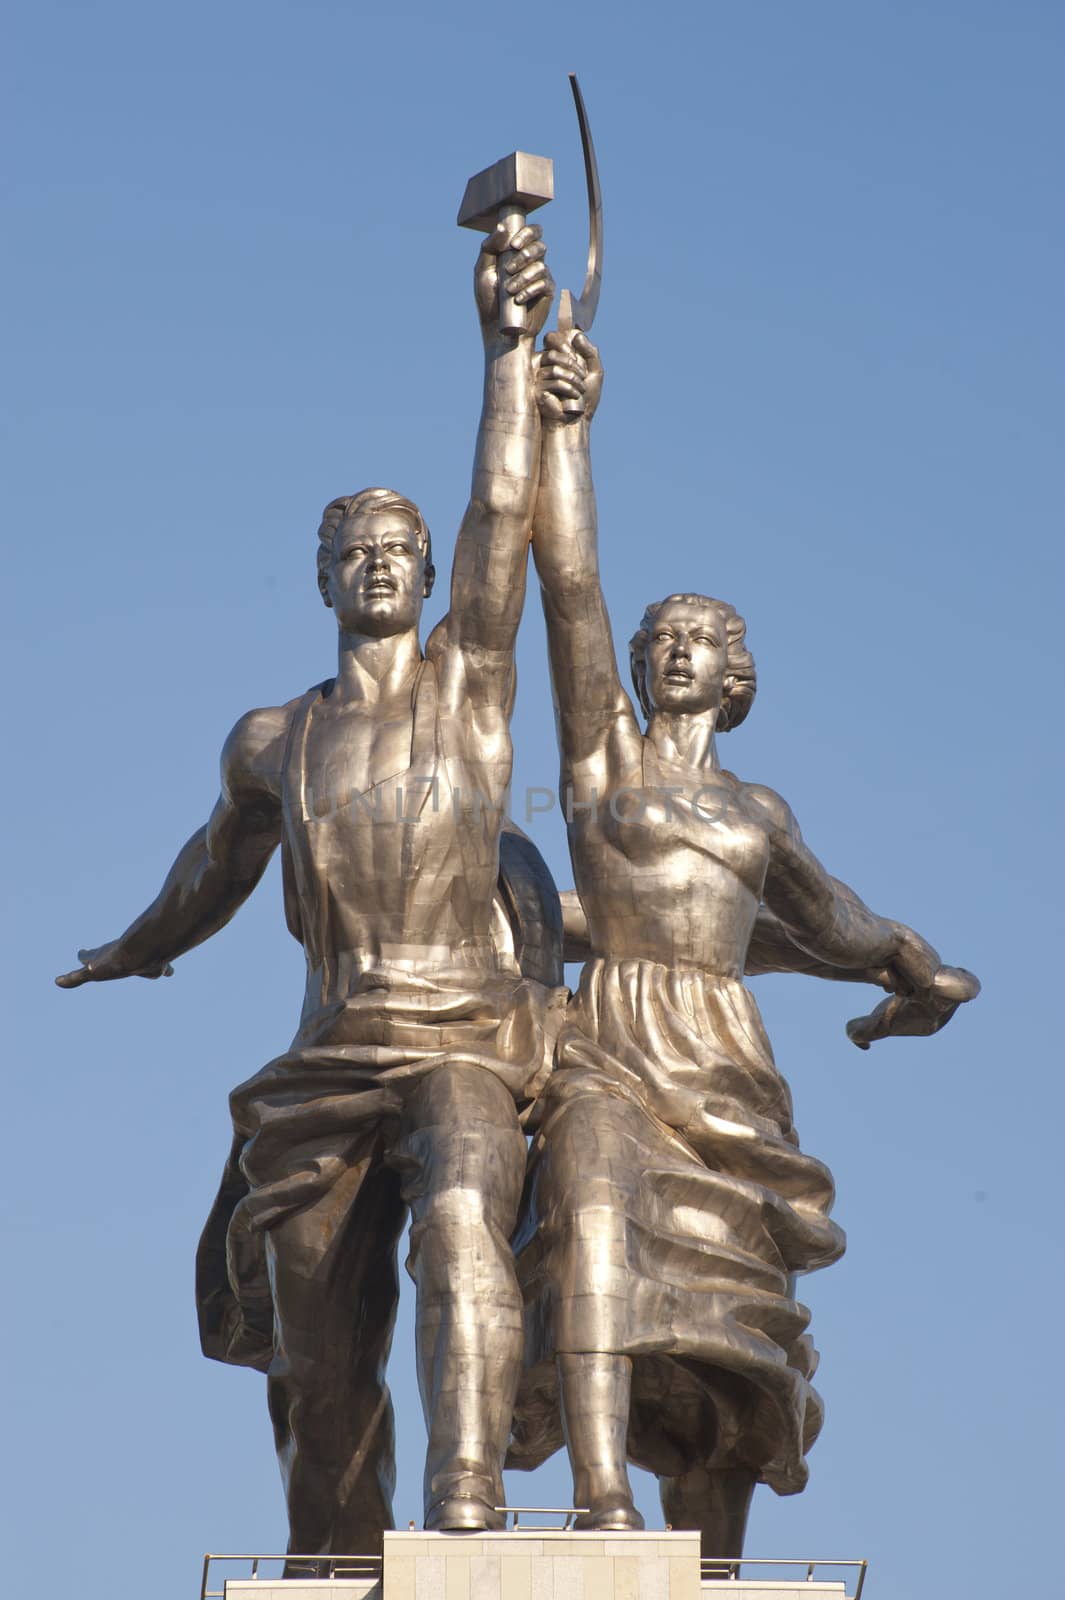 Sculpture "Worker and collective farmer". Taken in Moscow, Russia on May 2012